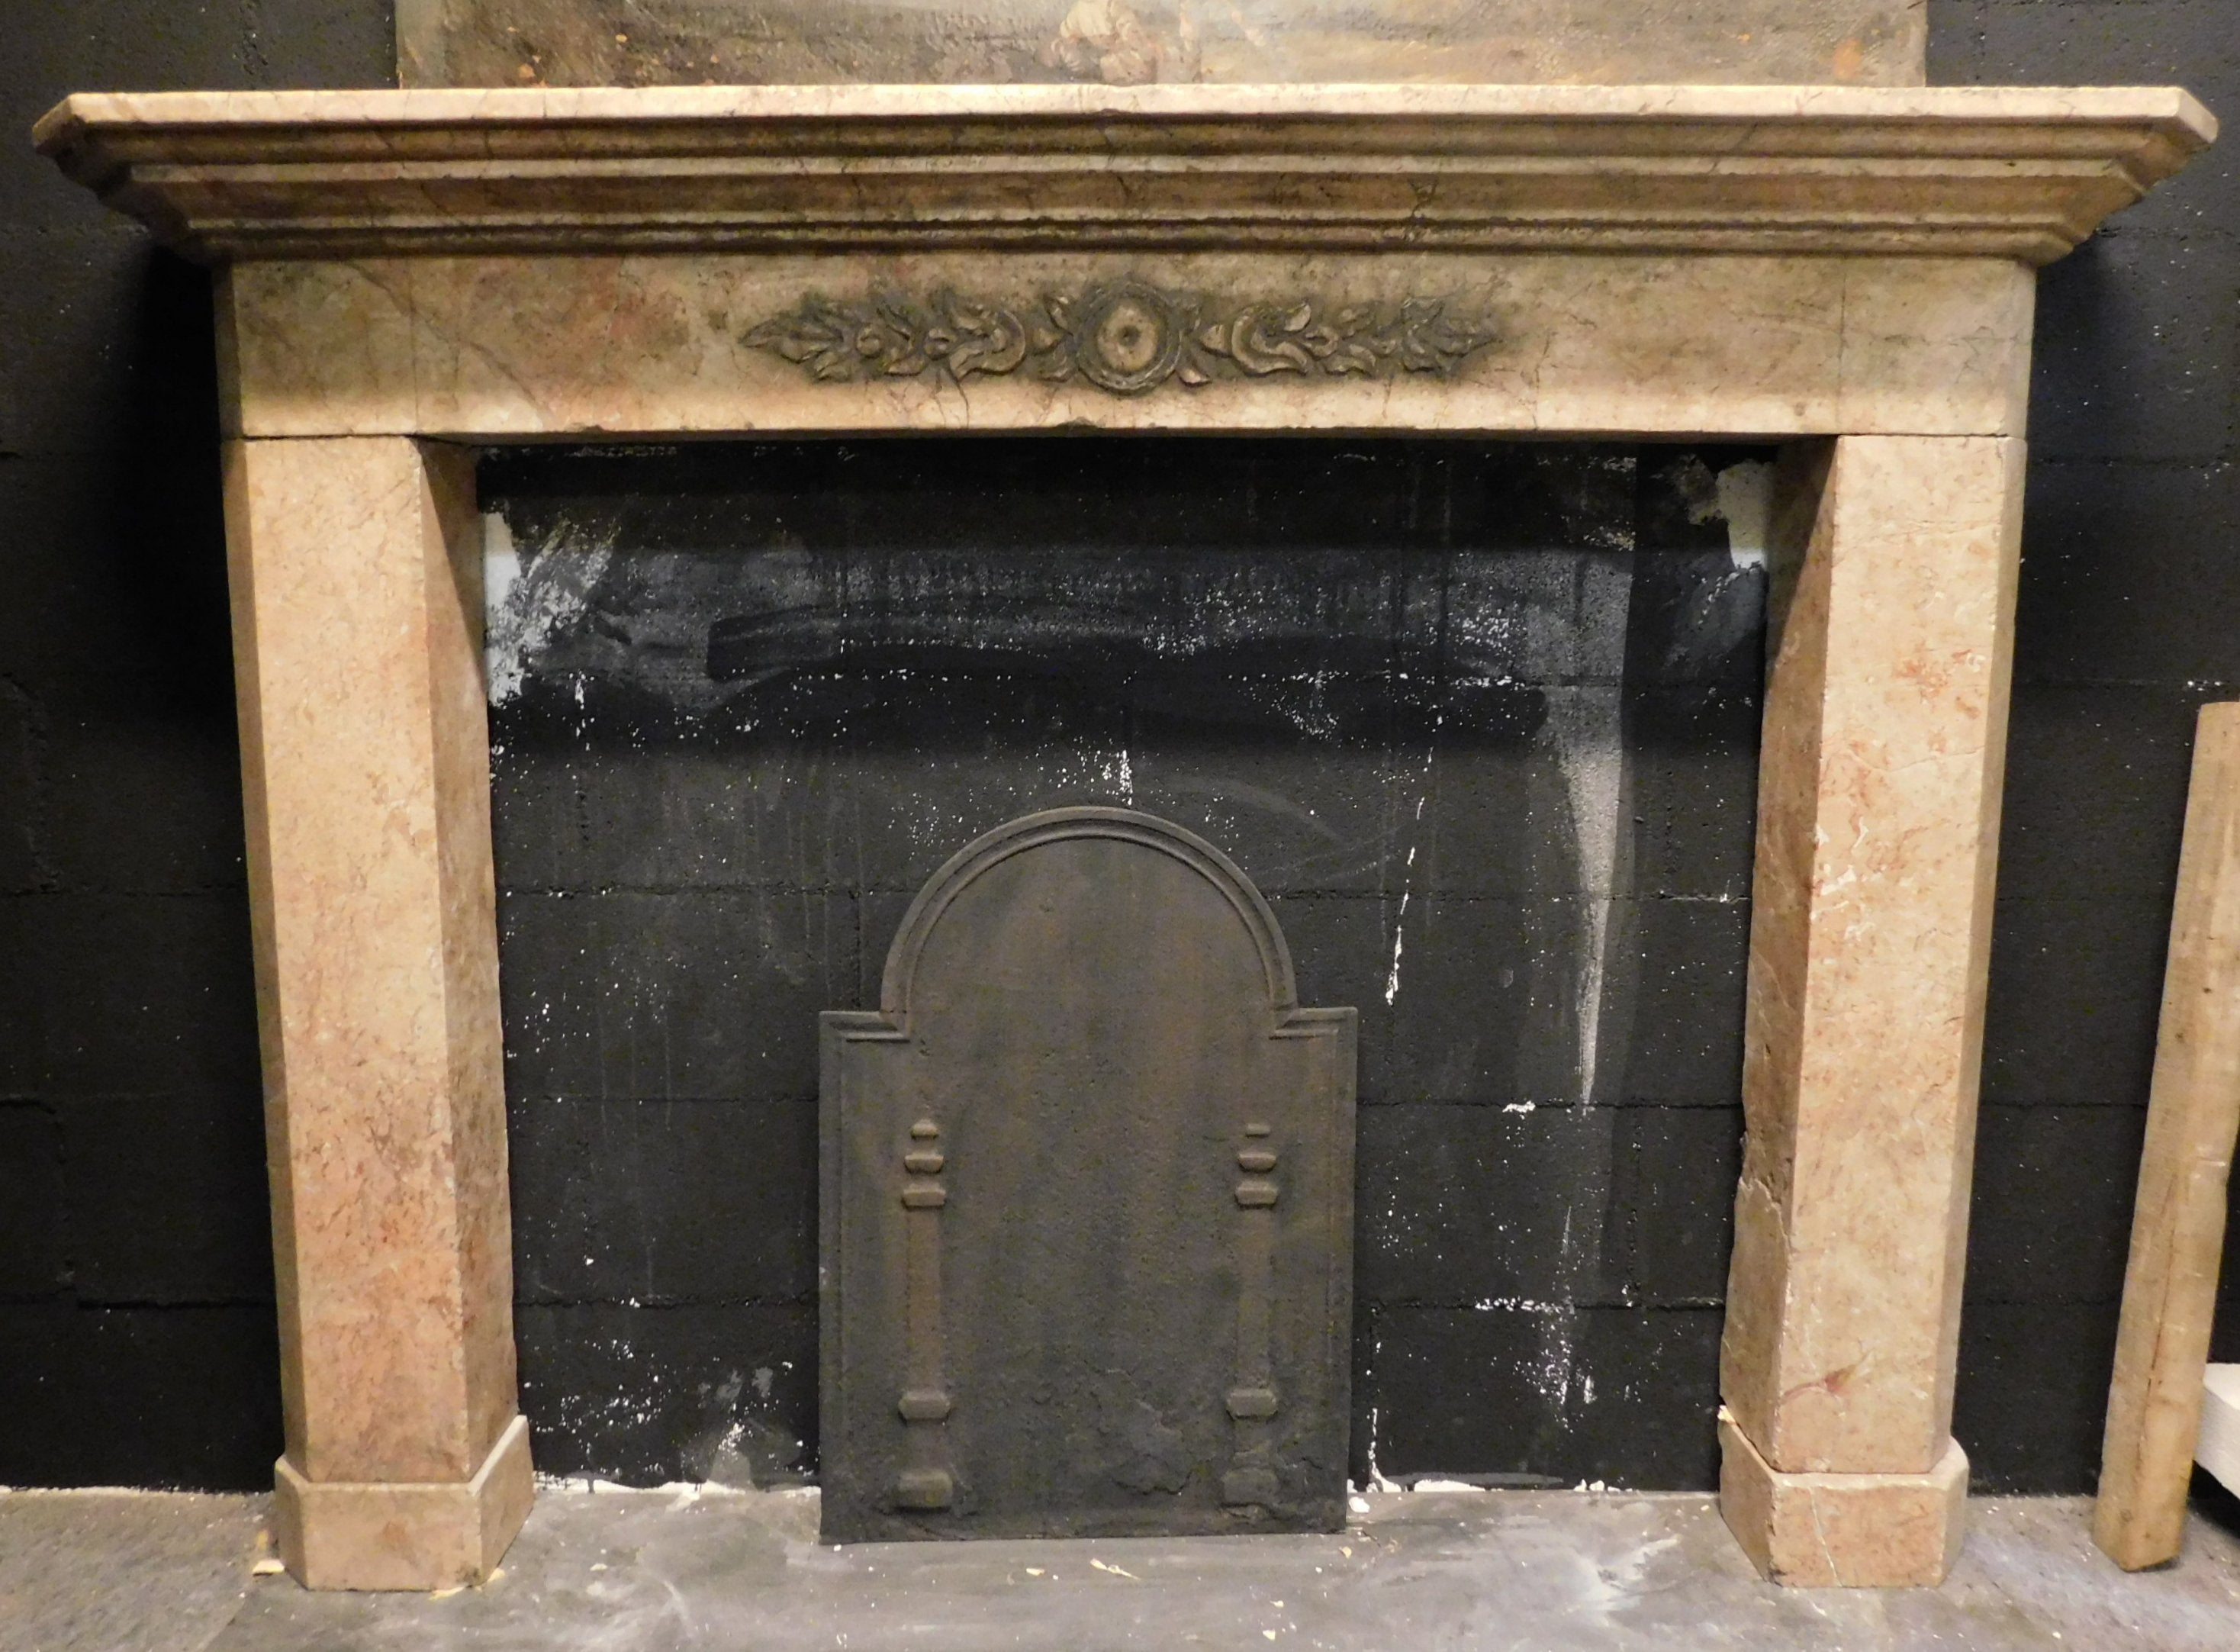 Antique fireplace mantle in pink marble called Breccia Oniciata of Brescia, hand-carved with decoration on the central pediment in the 19th century, for a palace in Italaia (Lombardy).
Geometric, simple and clean, it preserves the historical memory